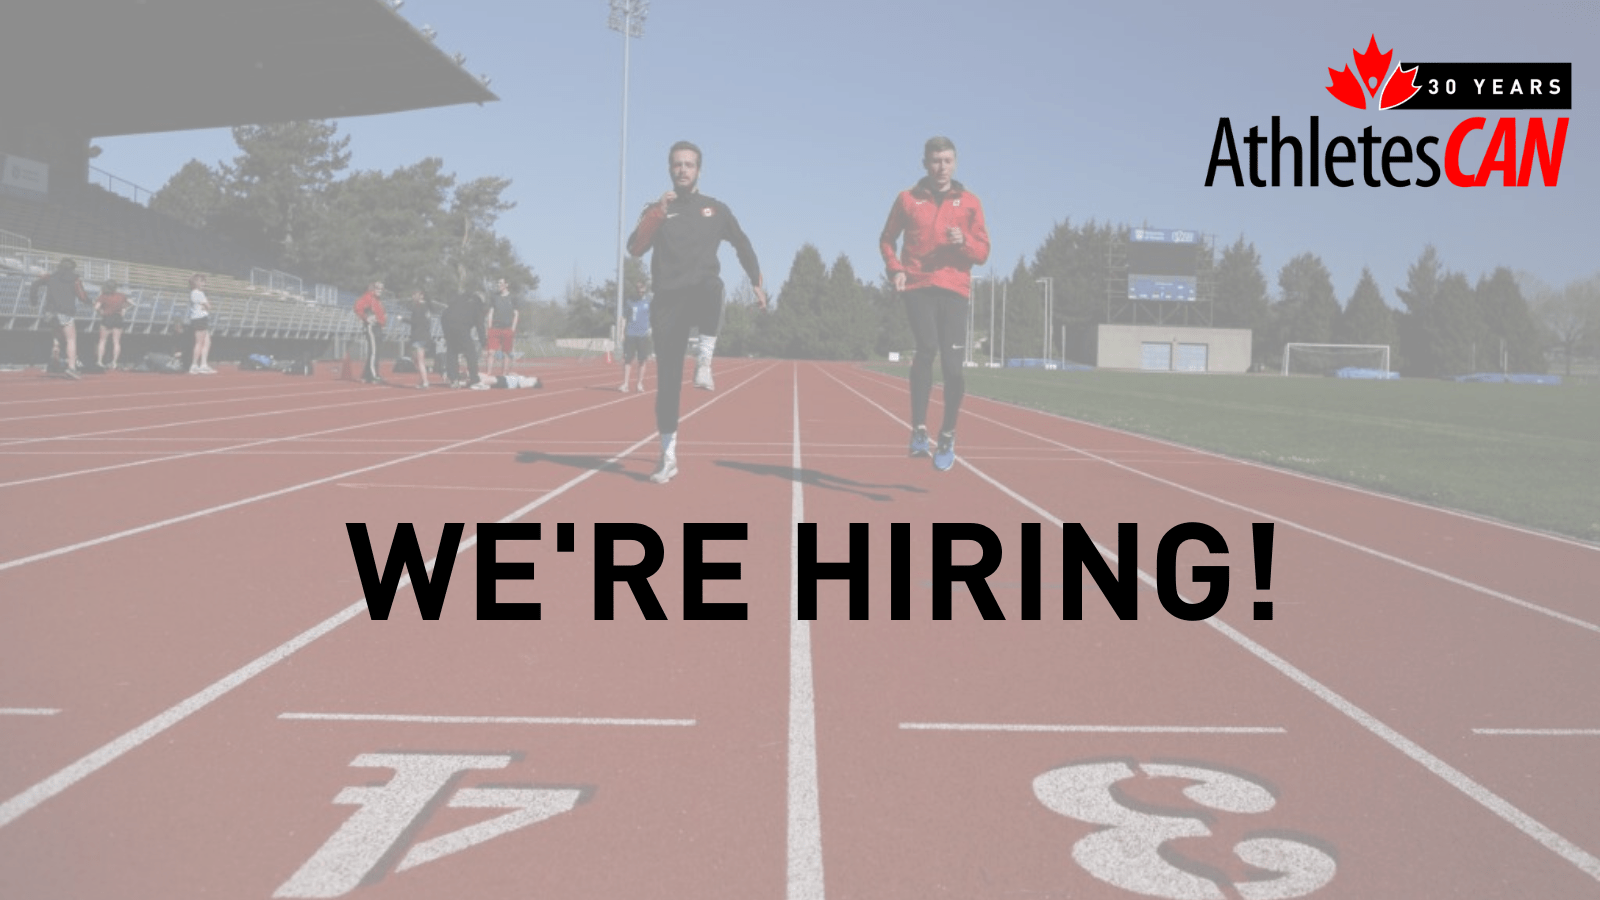 AthletesCAN launches Spring 2022 recruitment